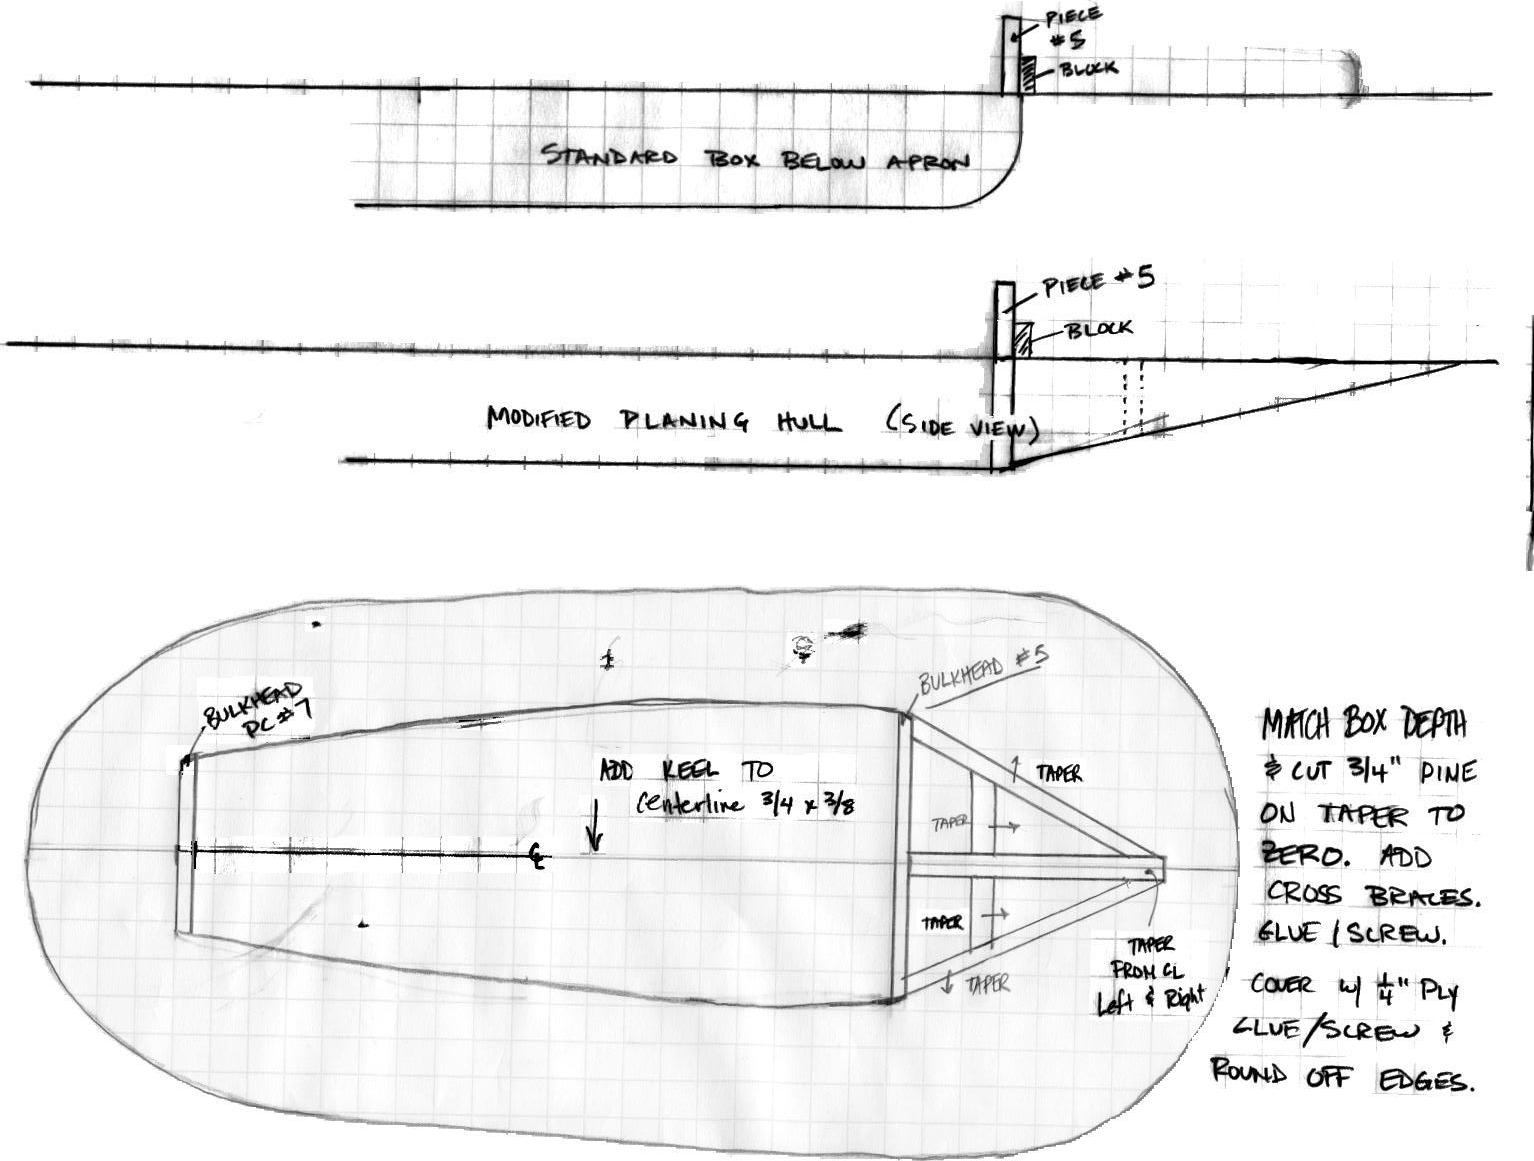 Layout Boat Plans Free